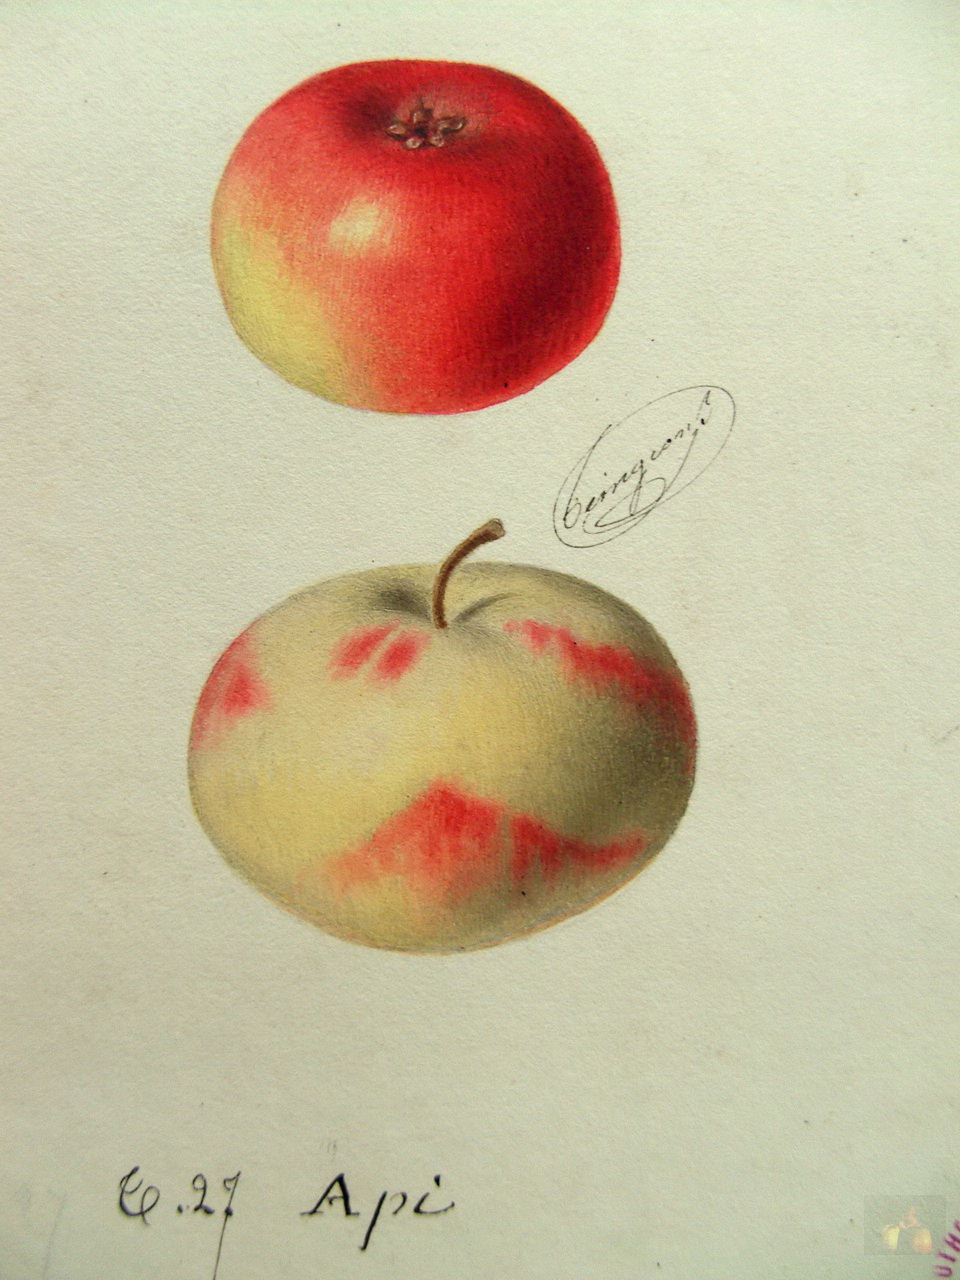 Appiola, the little-known colorful winter apple